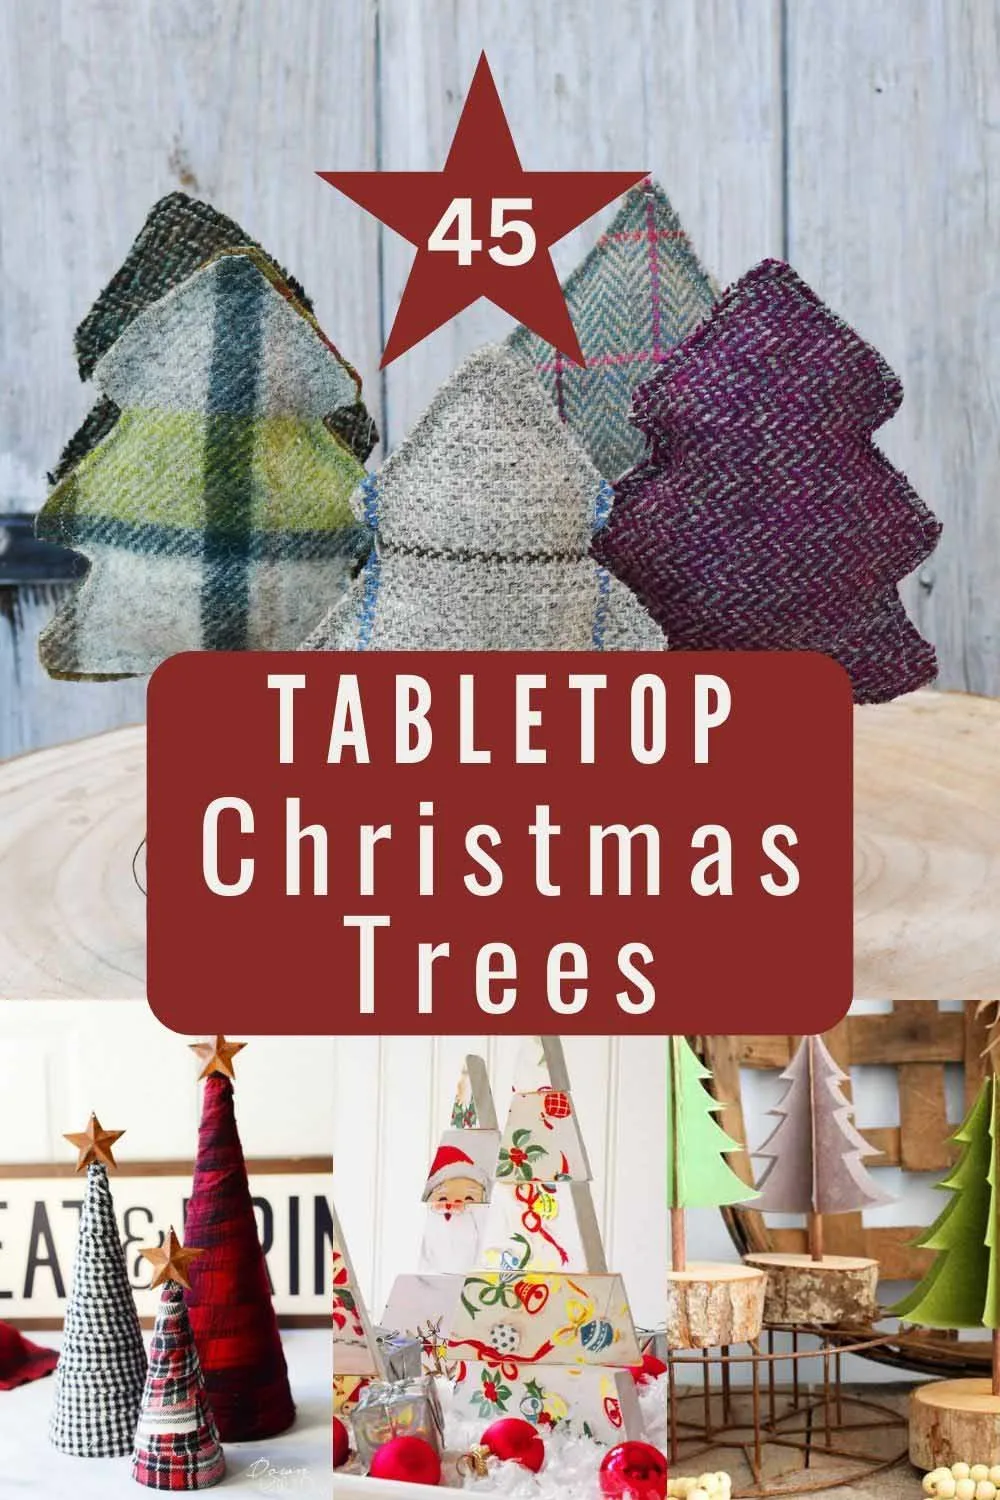 DIY Button Christmas Tree Table Topper - Girl, Just DIY!